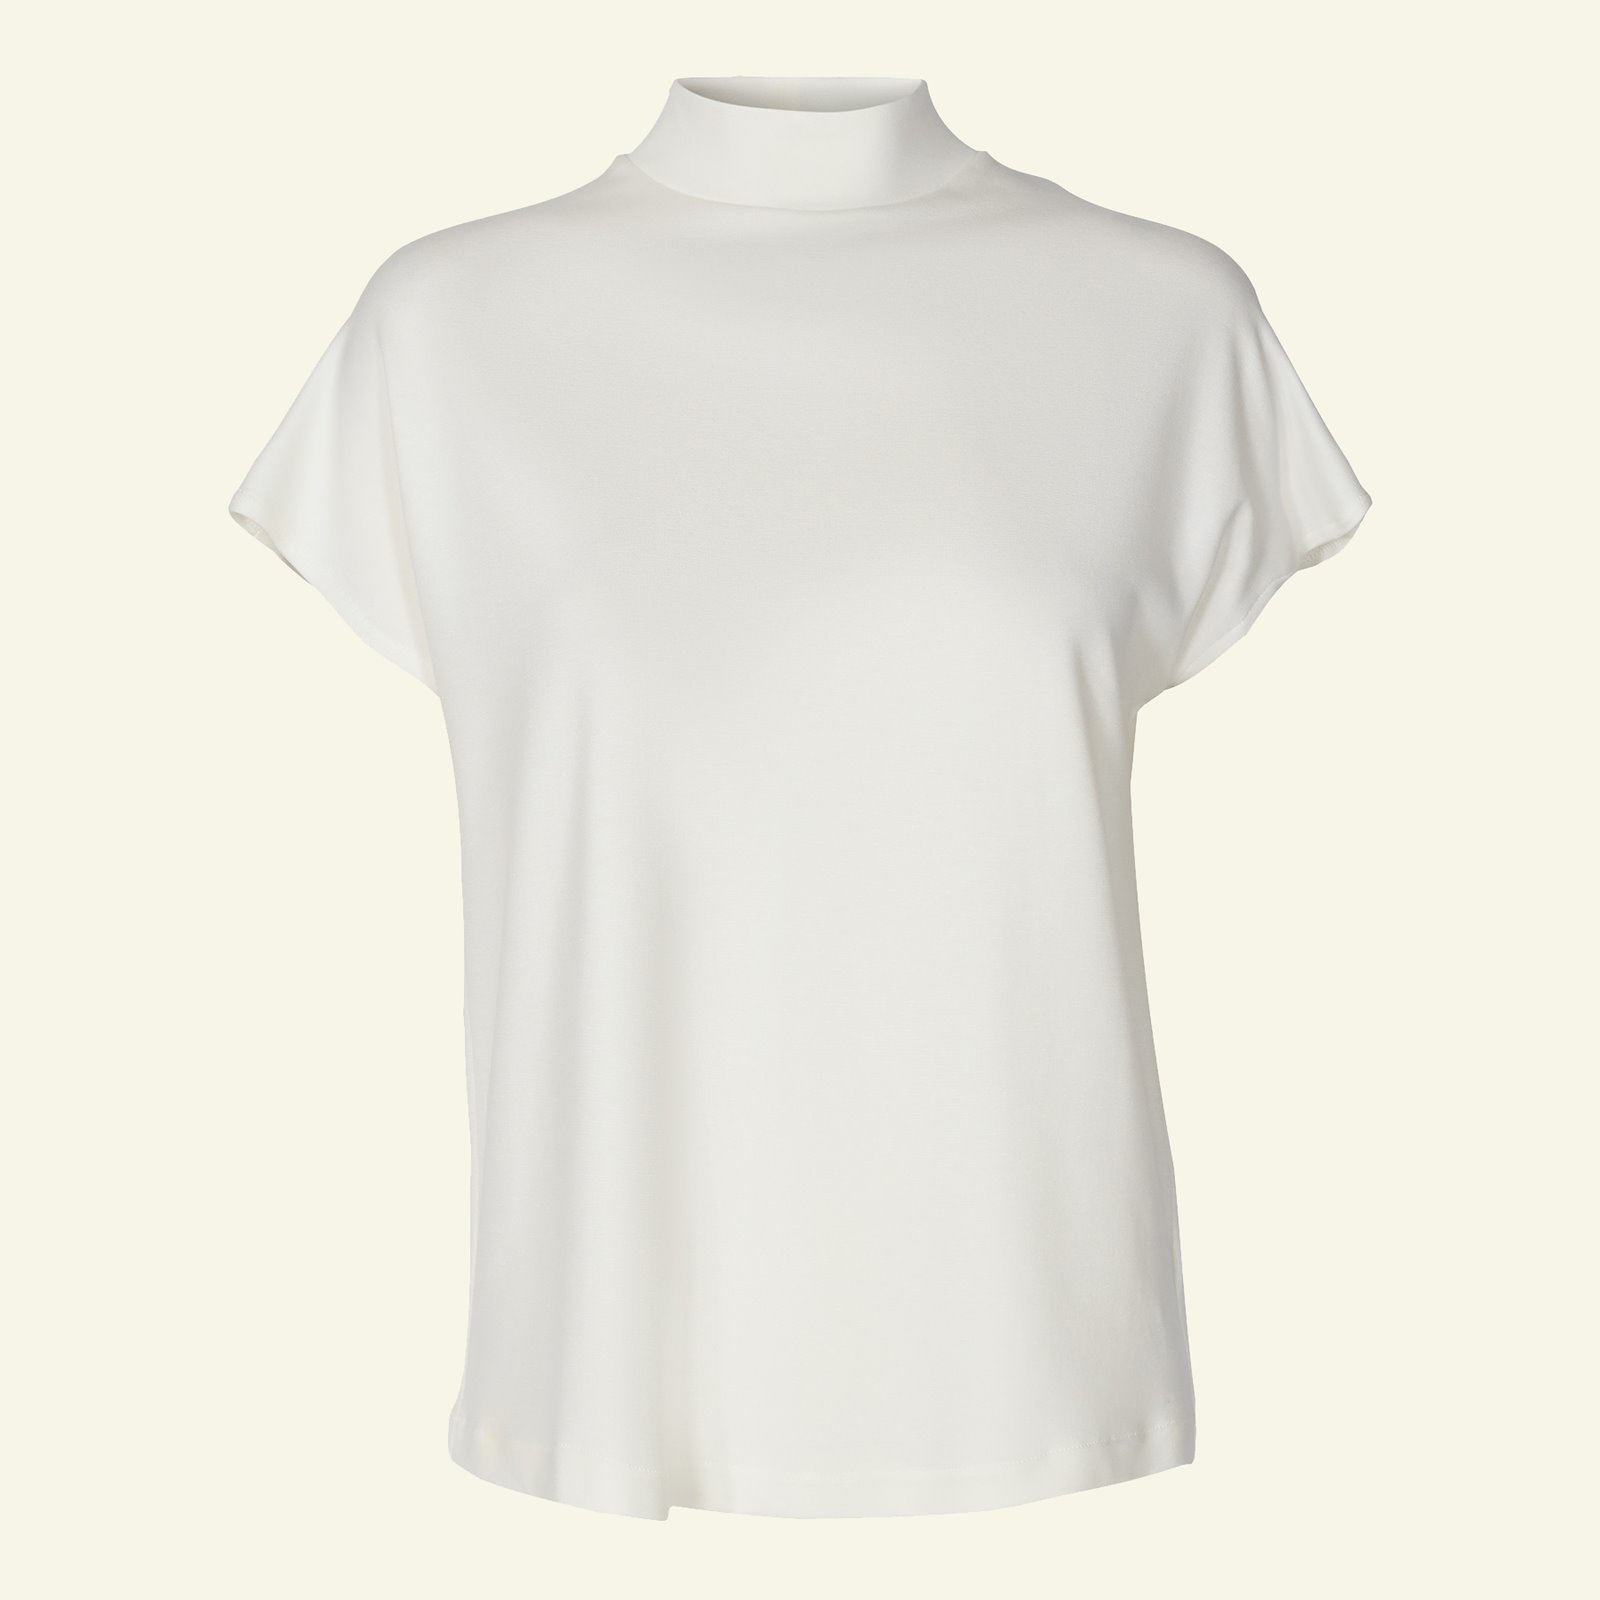 T-shirt and dress with high-neck, 38/10 p22069_270412_sskit